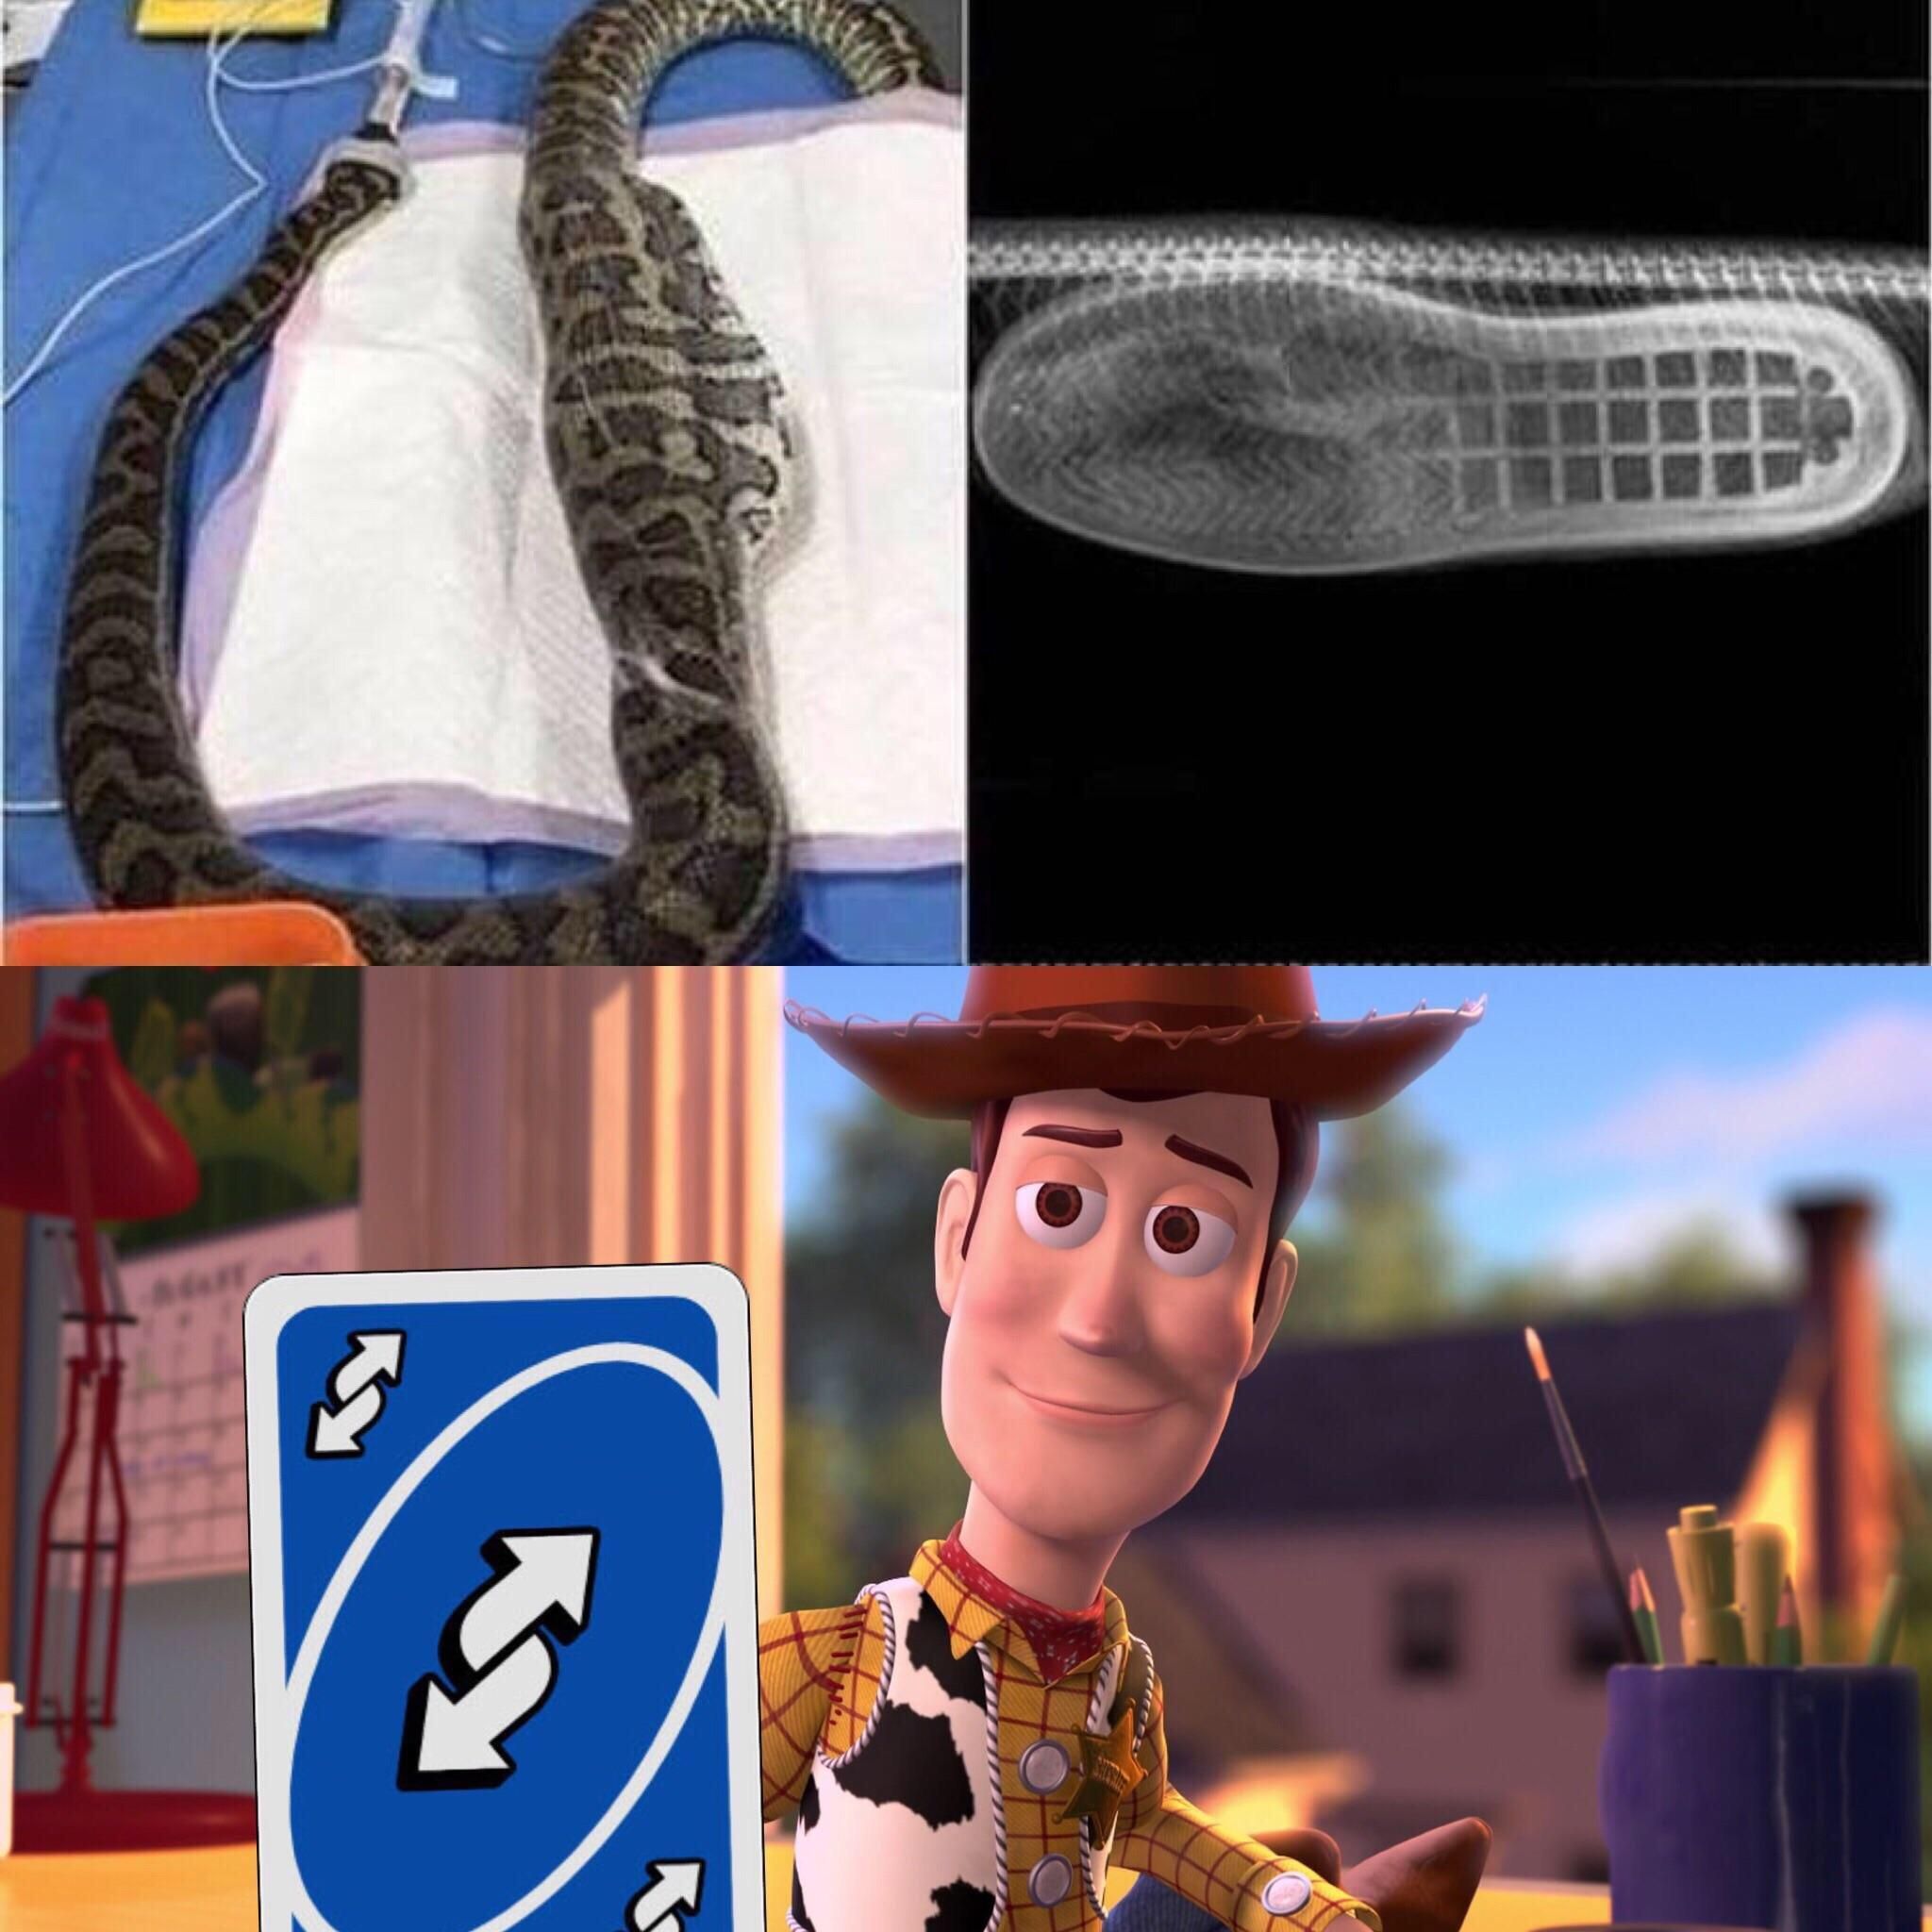 There’s a boot in my snake